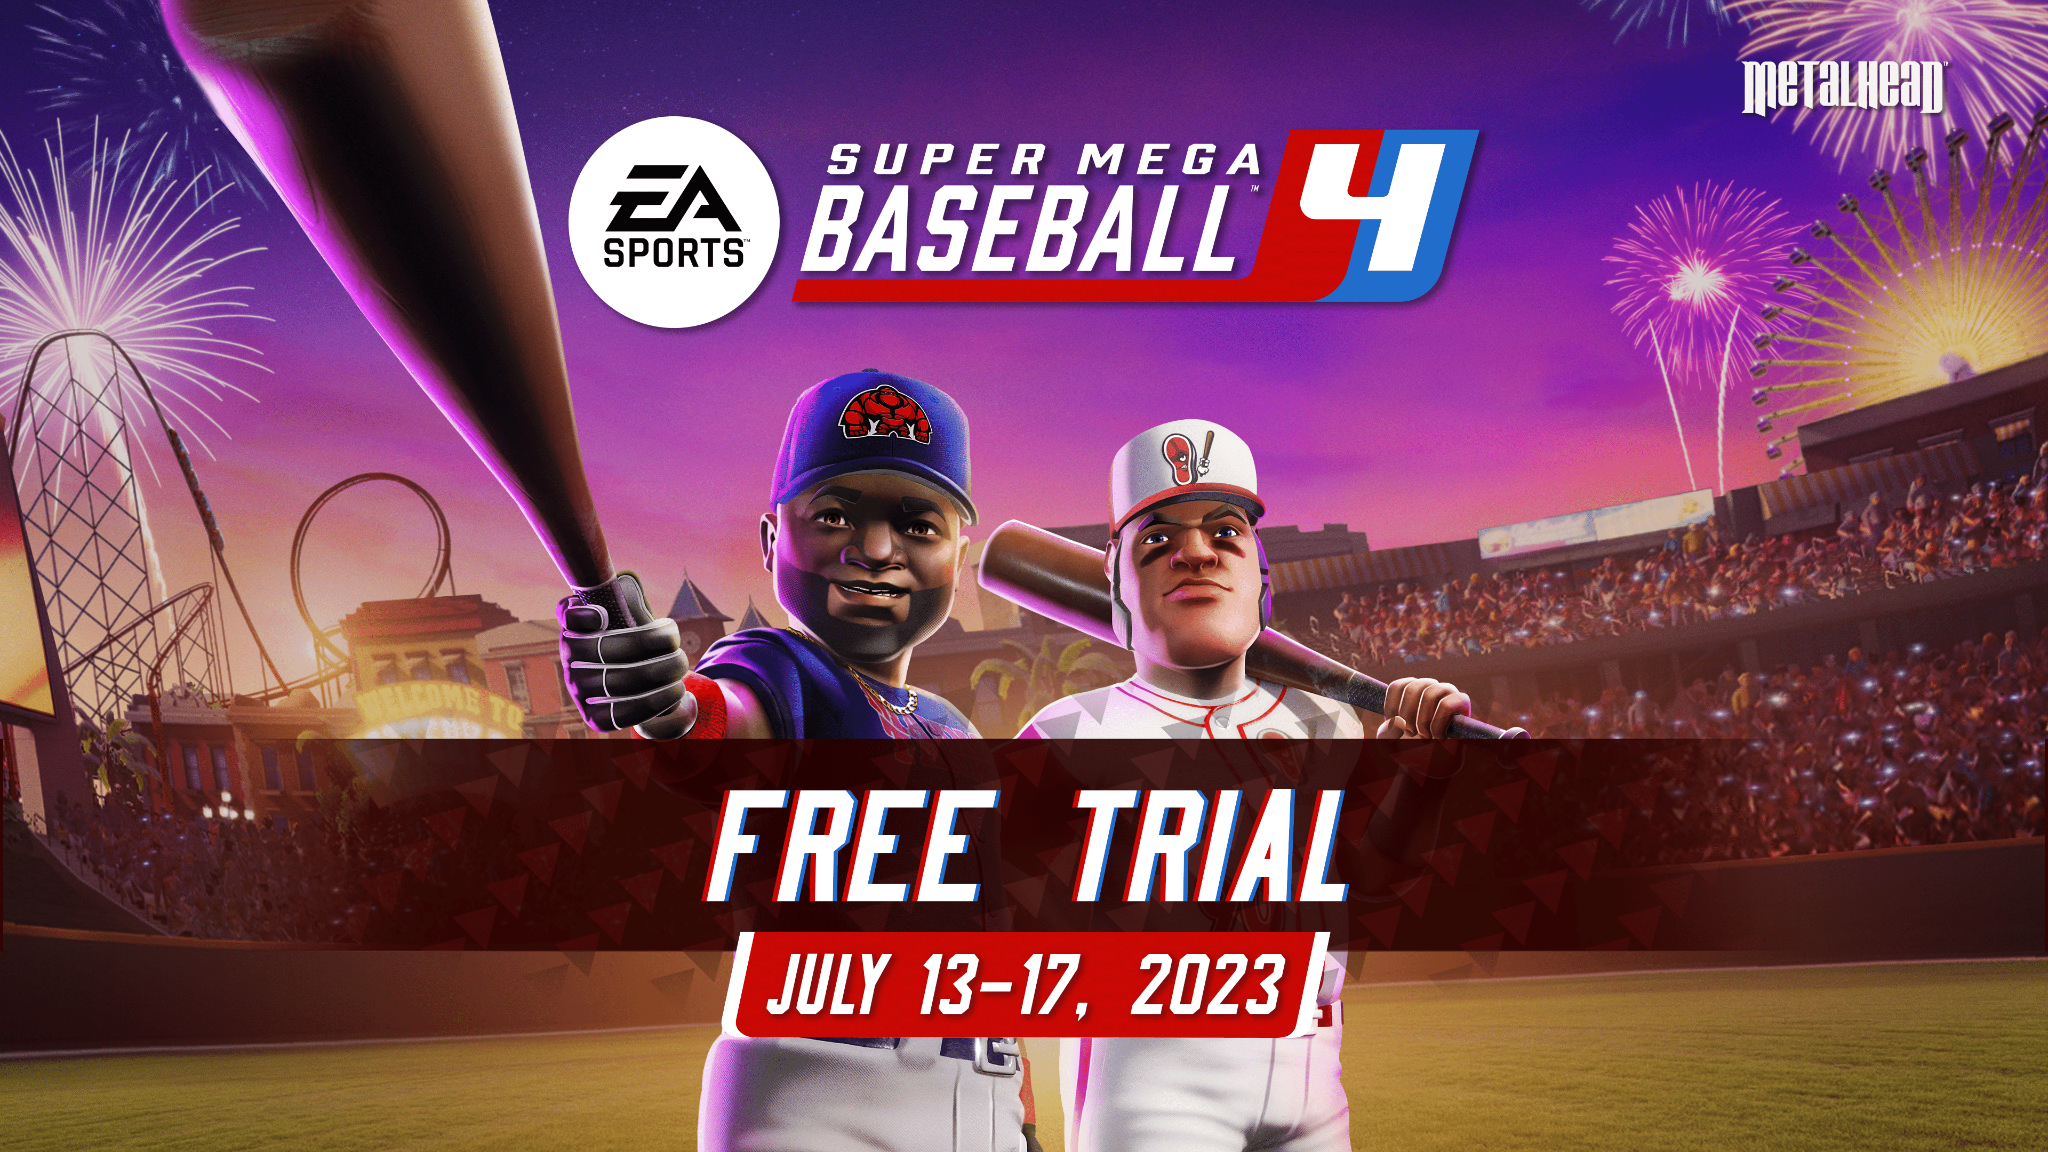 Super Mega Baseball 4 Free-to-Play for Limited Time on PC